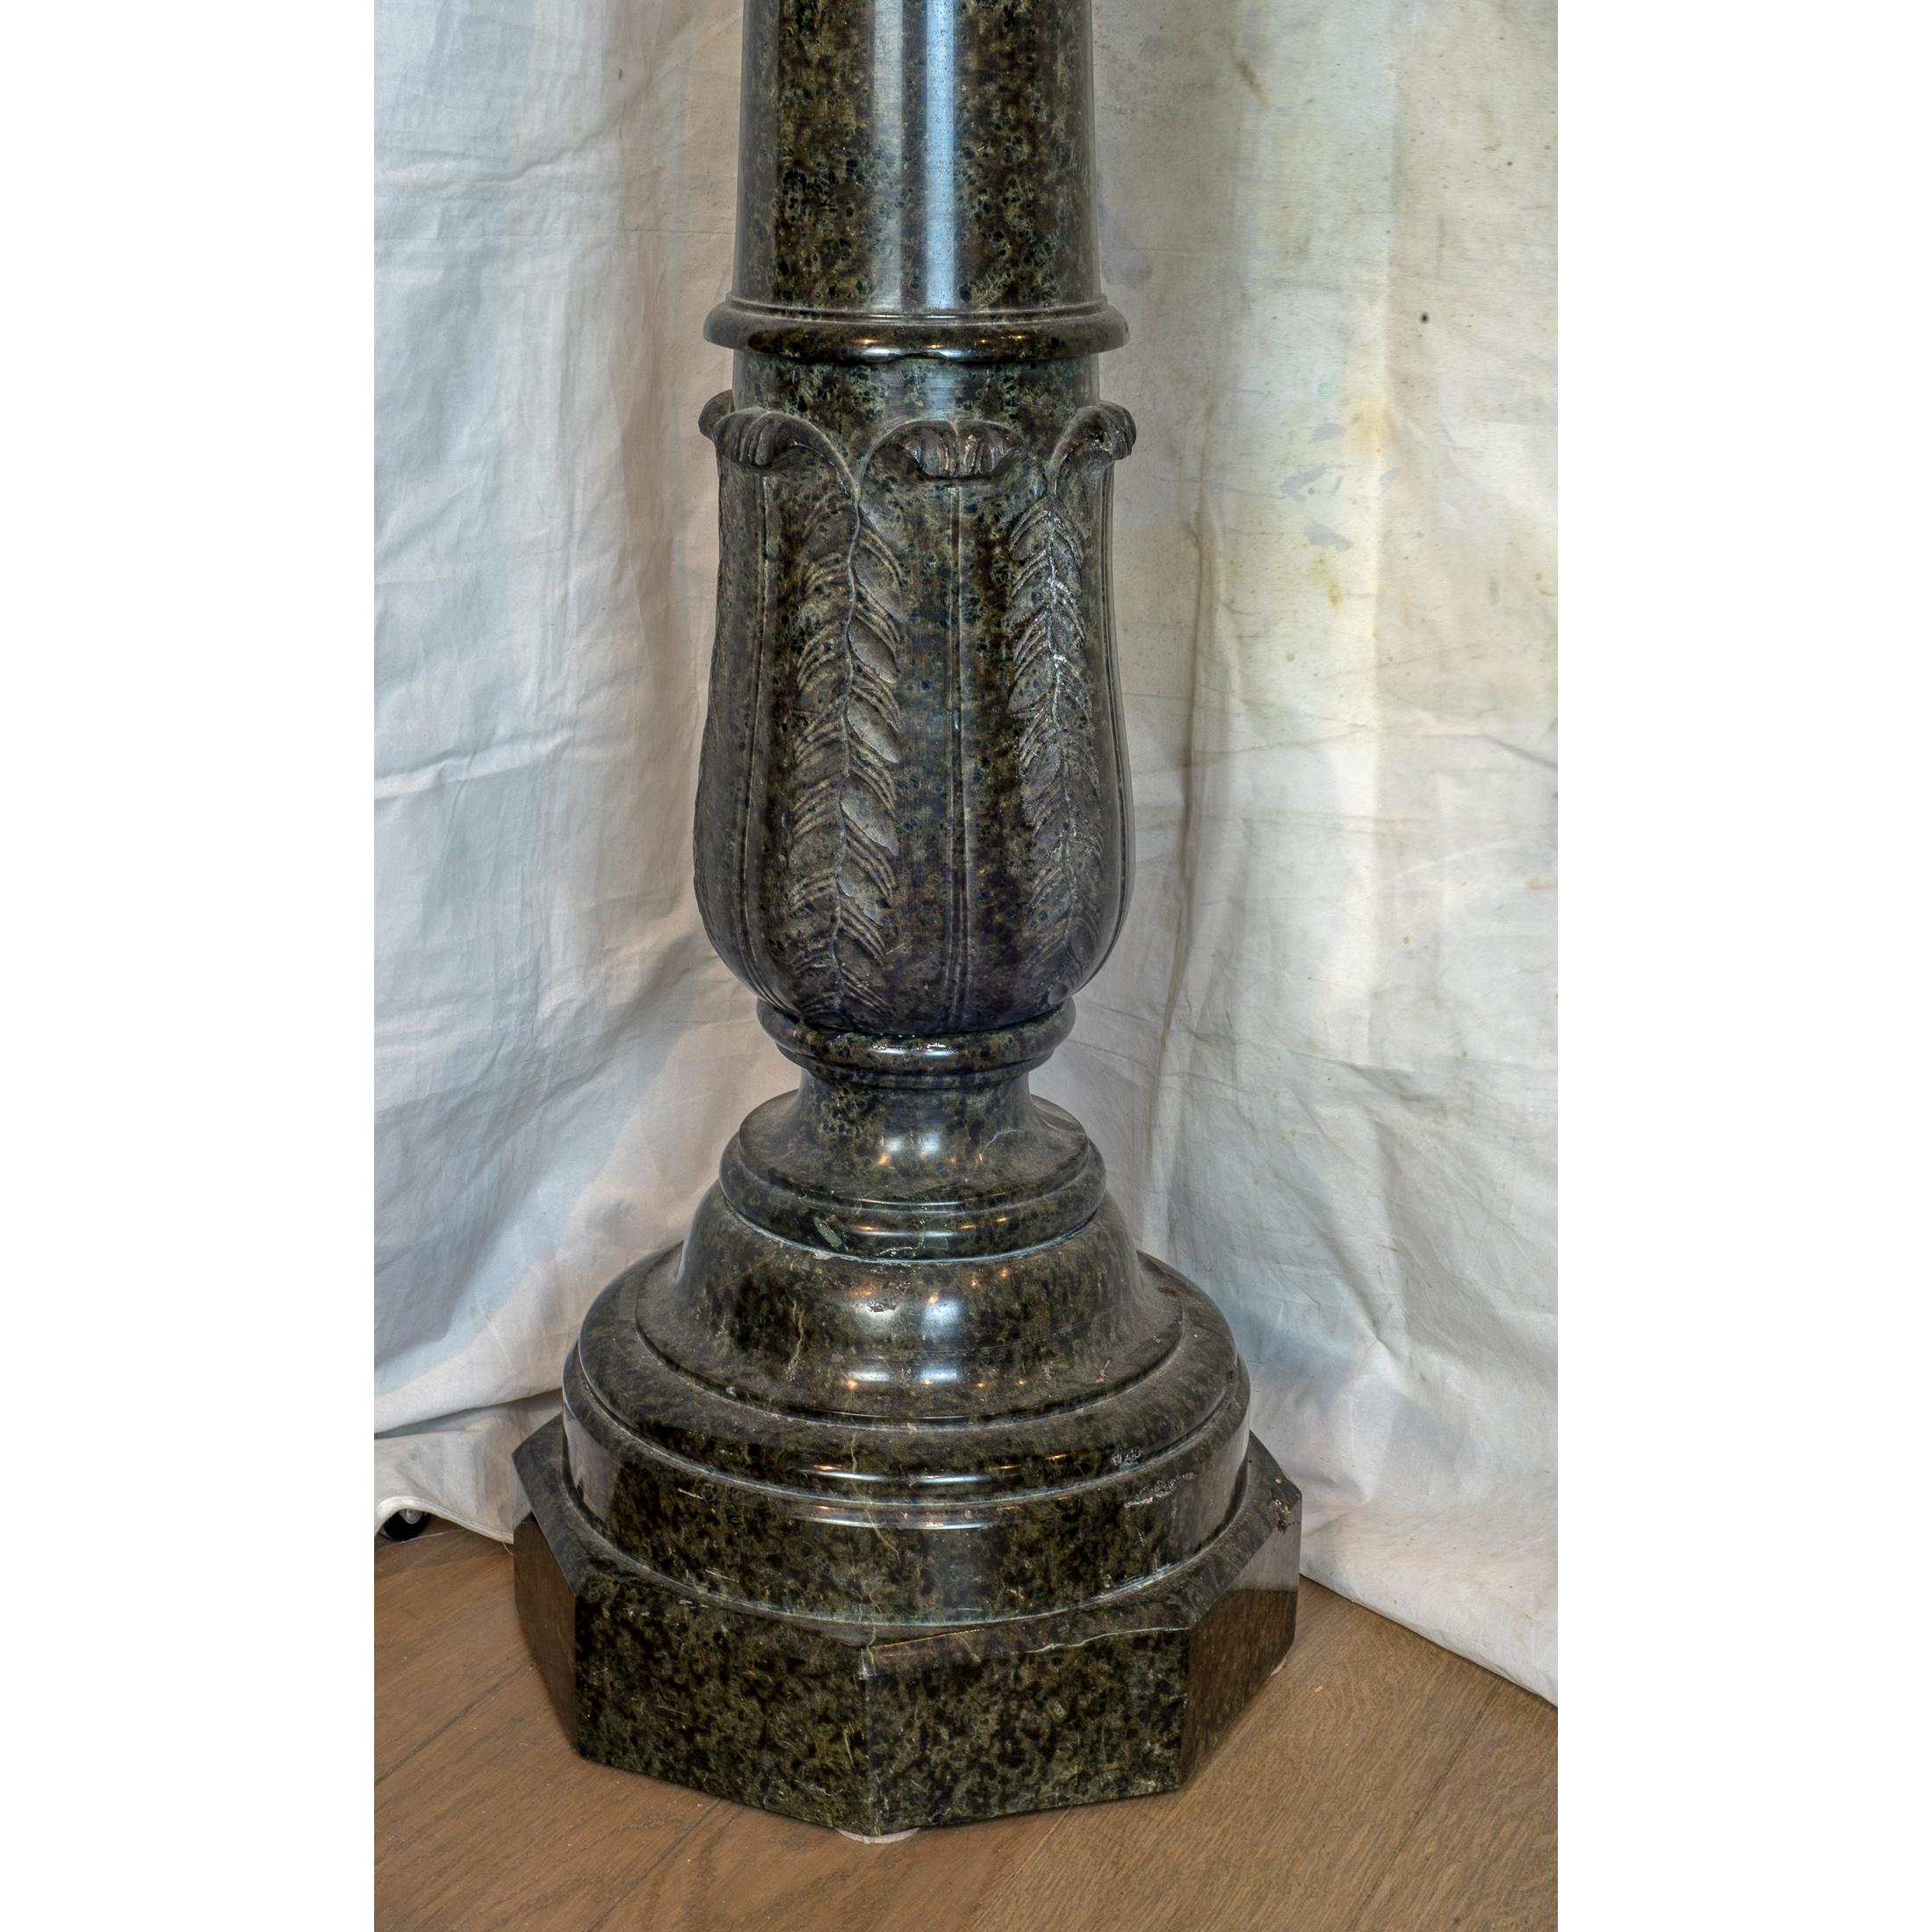 Each as a stylized lotus flower on a central baluster upright stem, on a carve and cylindrical base.

Date: 19th century
Origin: Continental
Dimension: 42 3/4 in. x 13 in.